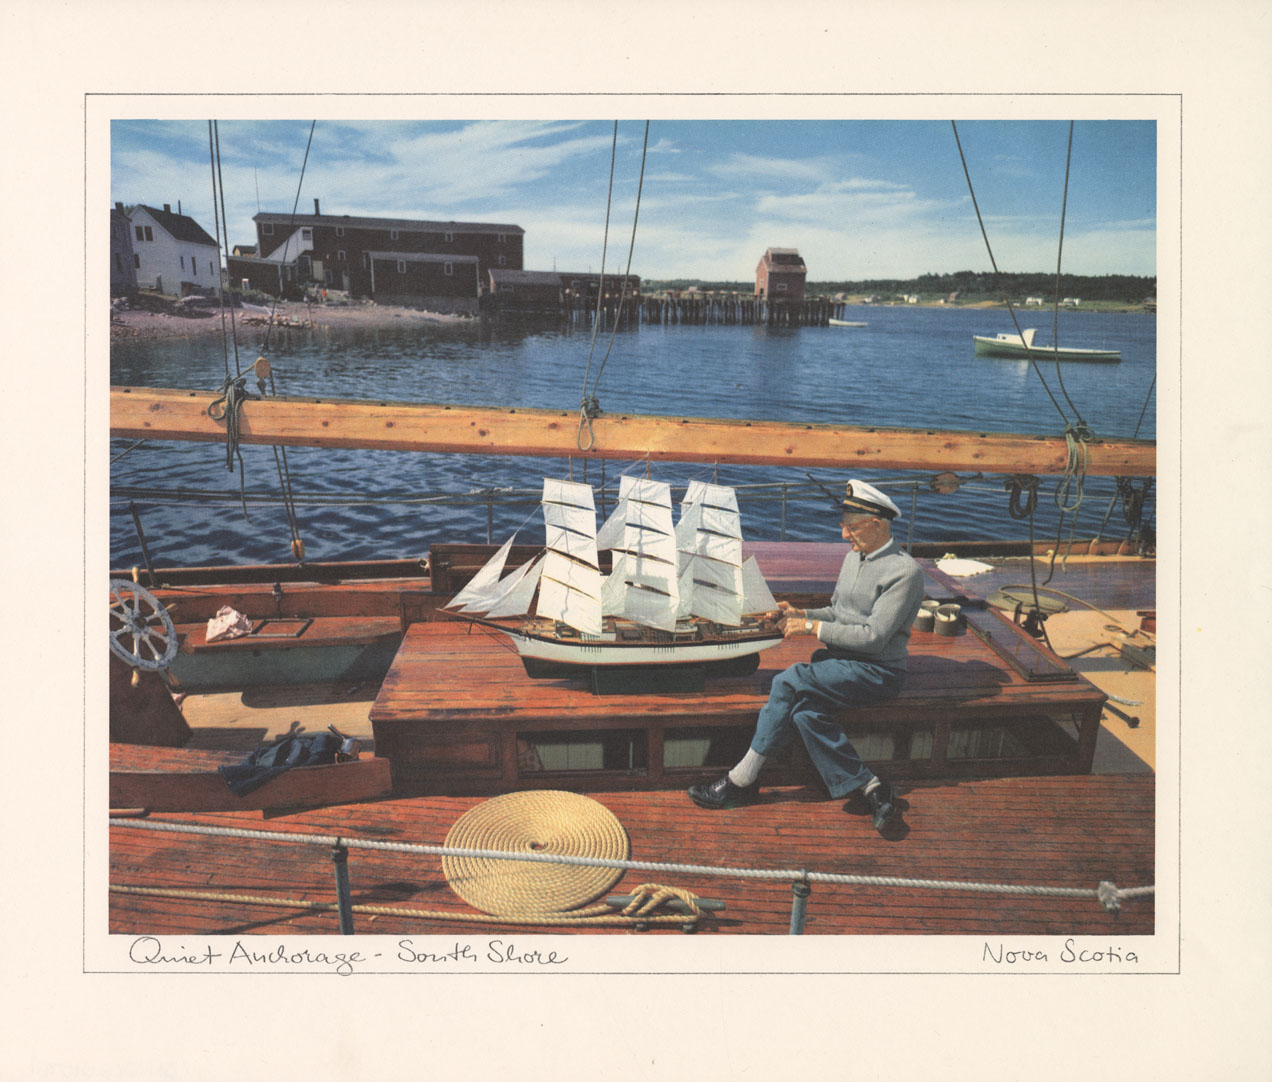 Book Jackets, Advertisements, and Art Reproductions: Atlantic Pavillion Photos of NS (from expo '67): Quiet Anchorage - South Shore